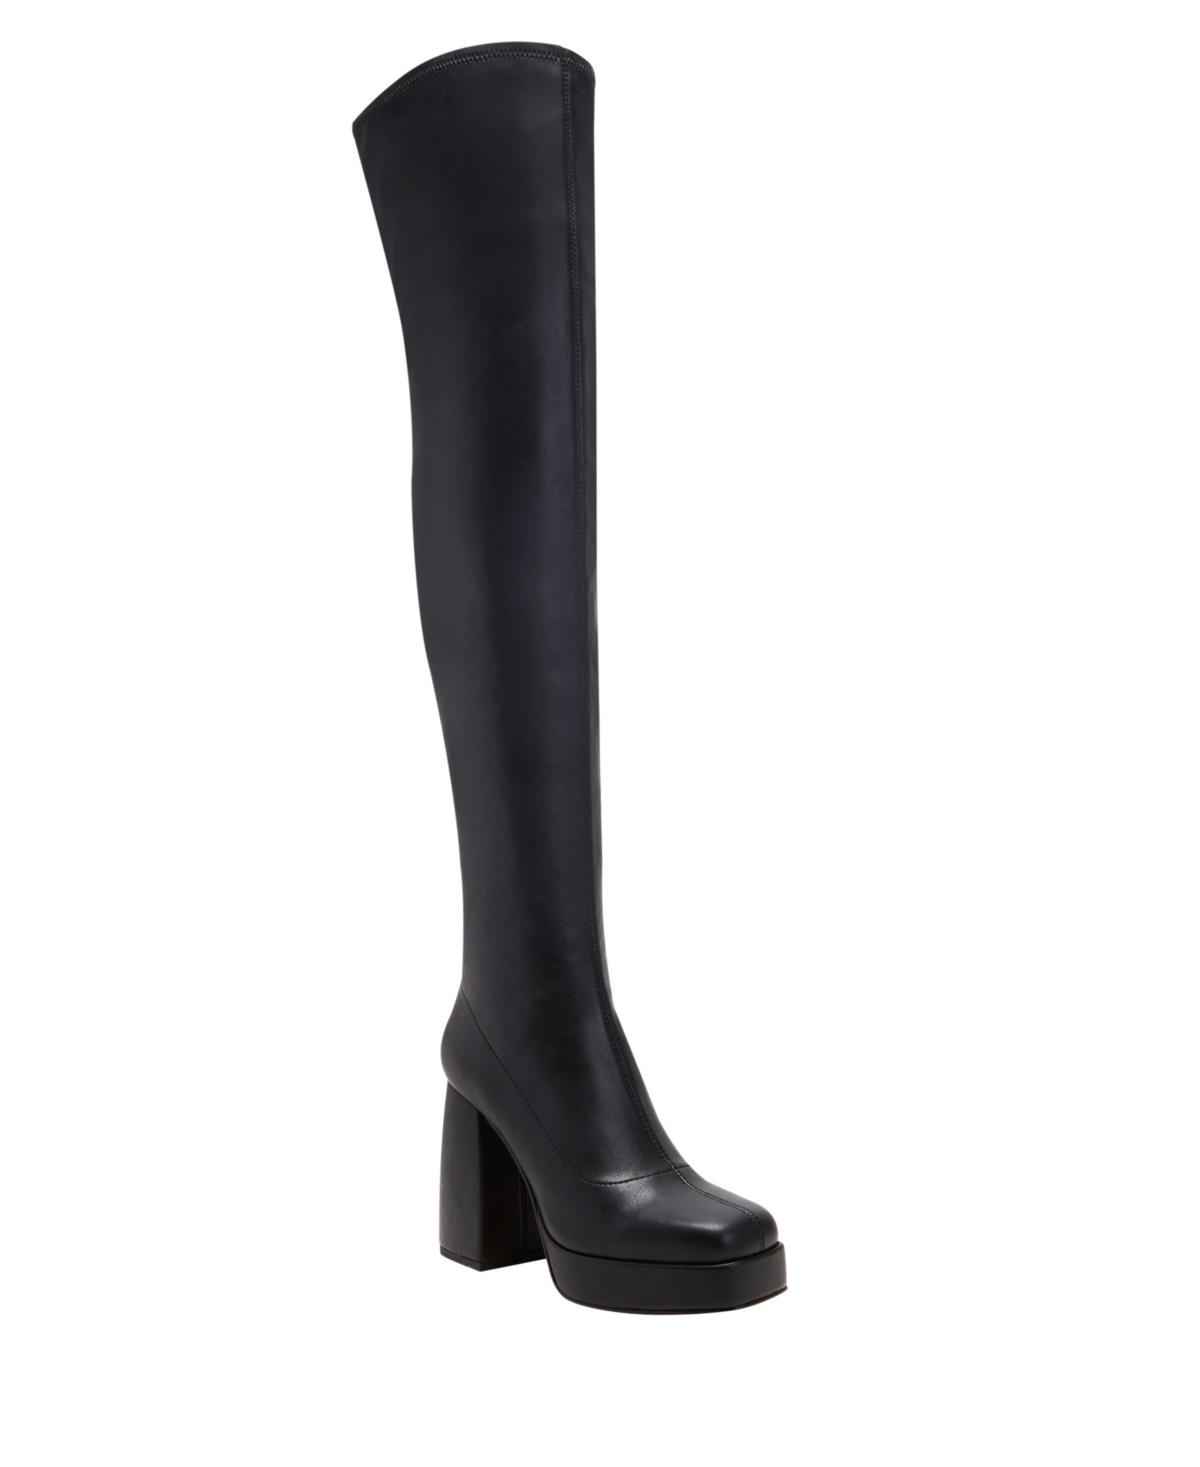 Women's The Uplift Over-The-Knee Boots - Chocolate